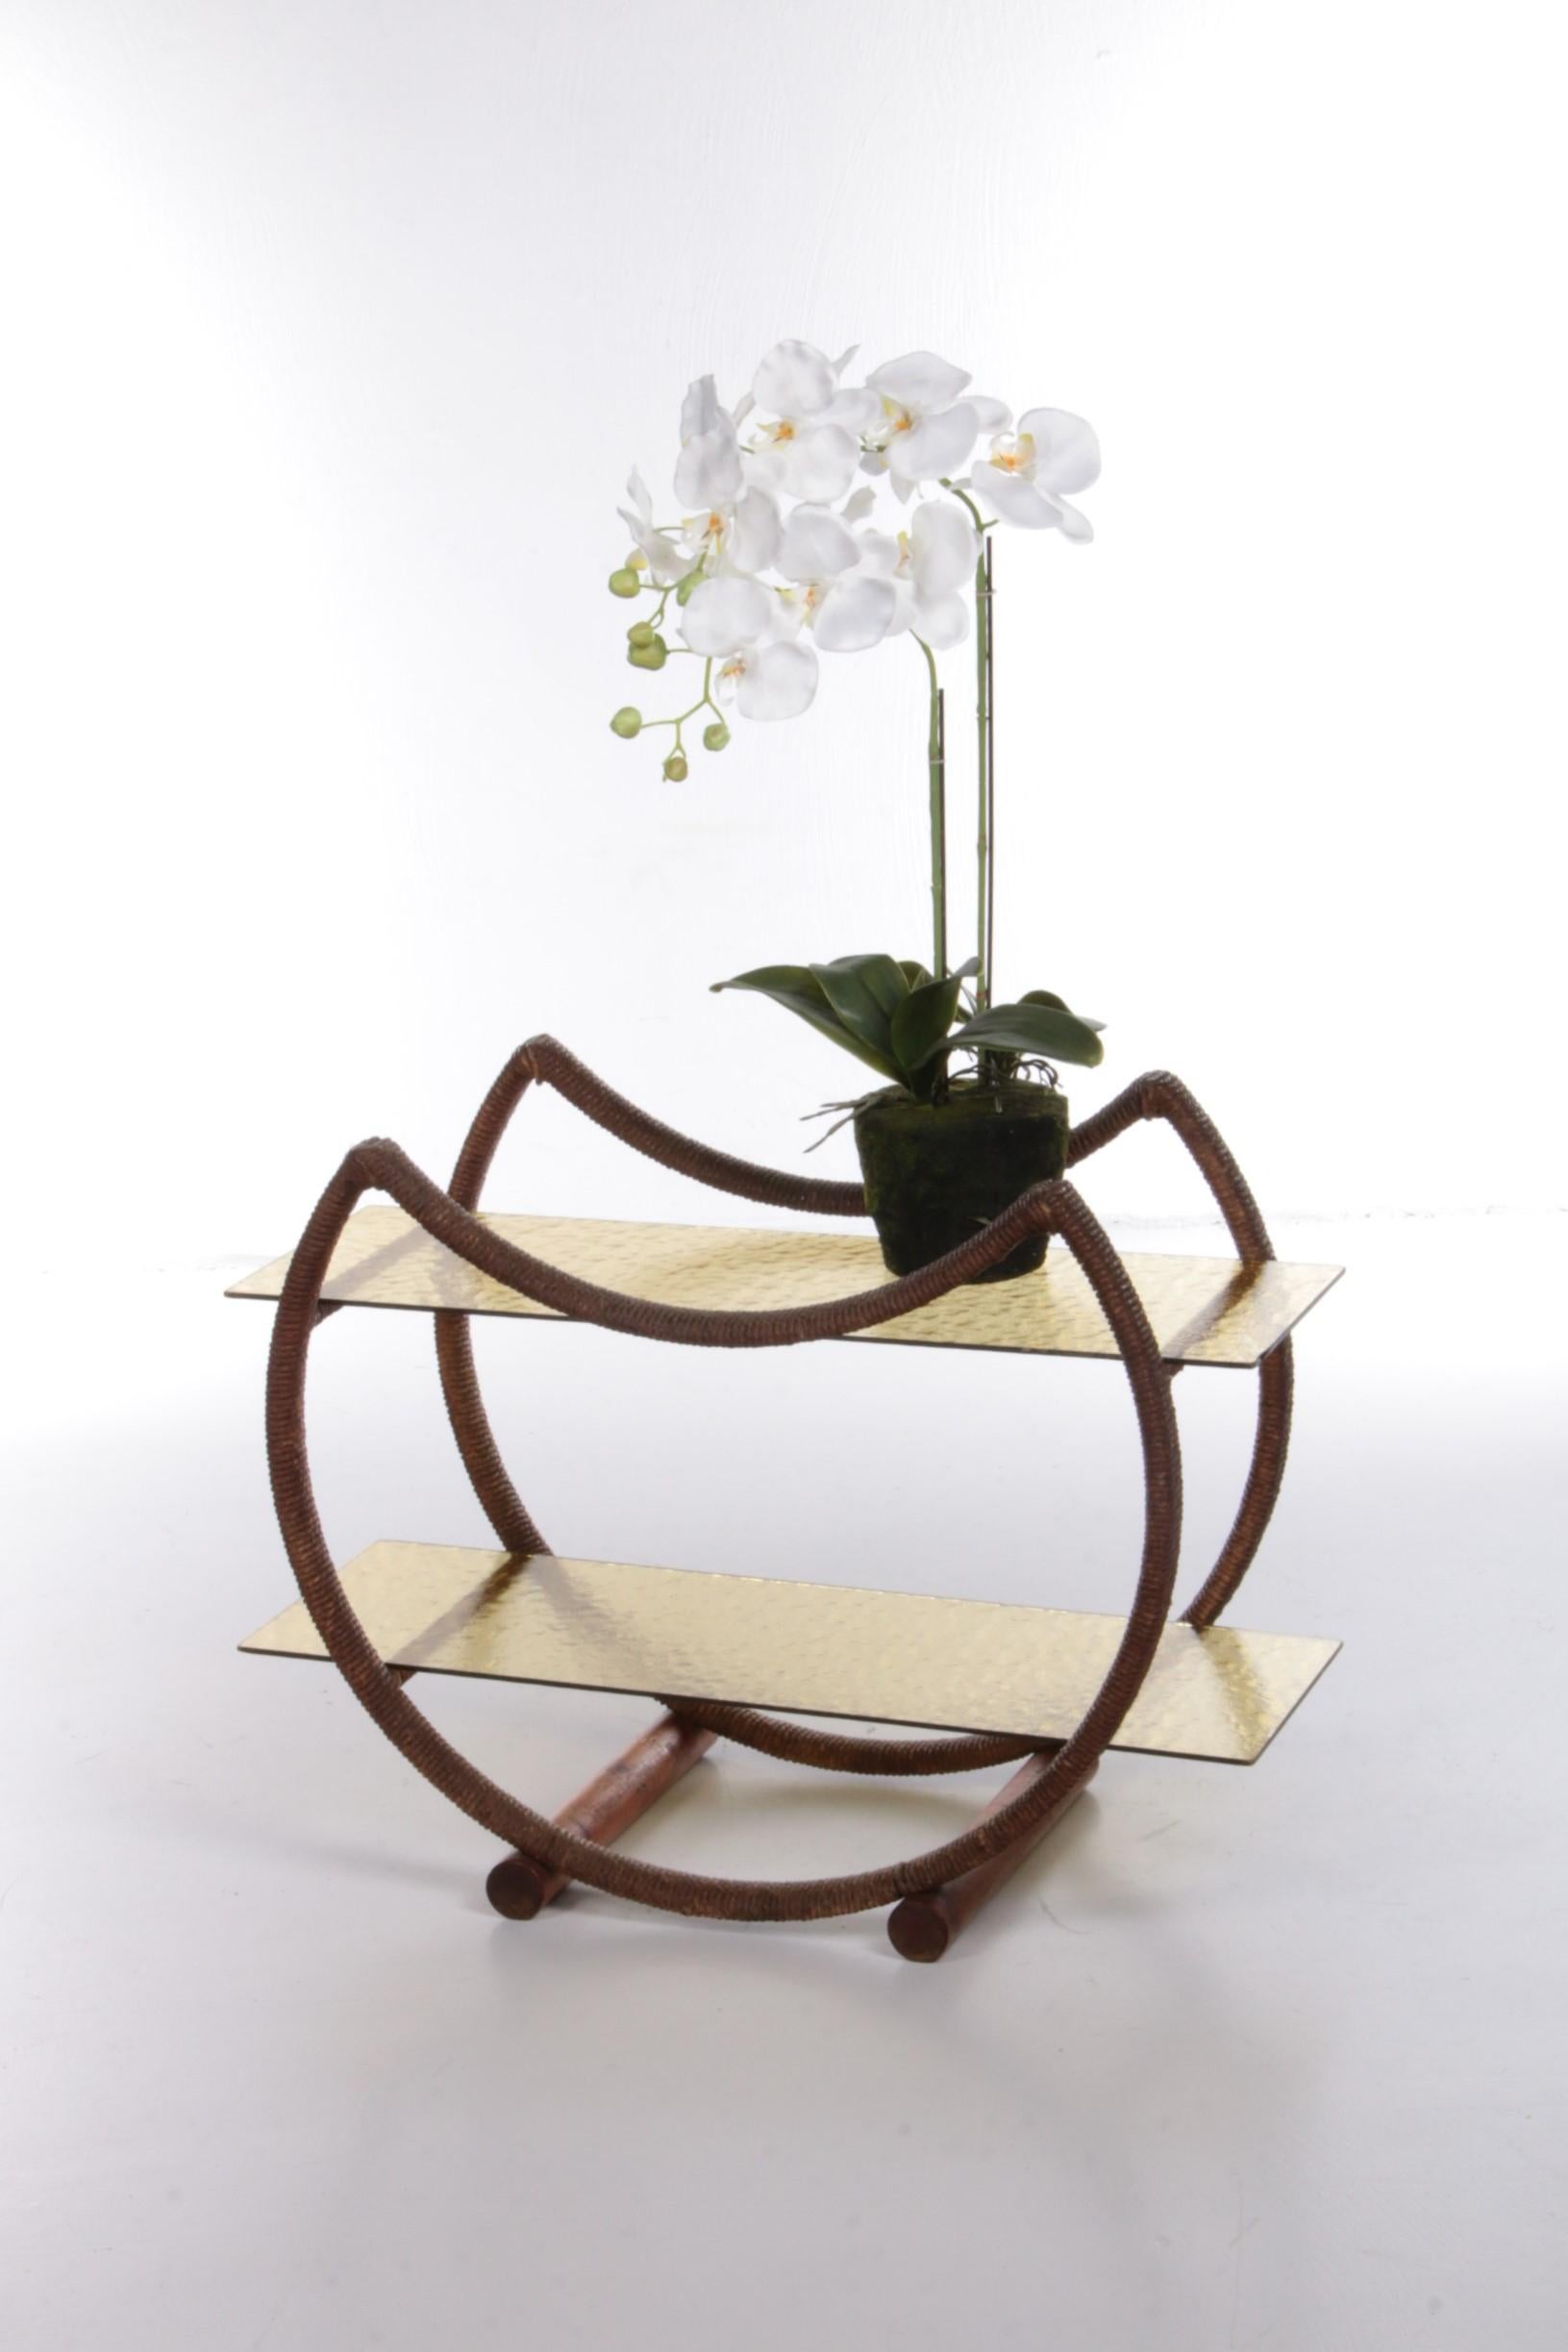 This is a side table with a story, because it comes from the well-known Carlton hotel in Copenhagen.

It is made of wood and braided jute in the 1960s with a beautiful aged look. This deep brown color is due to the years that have provided the